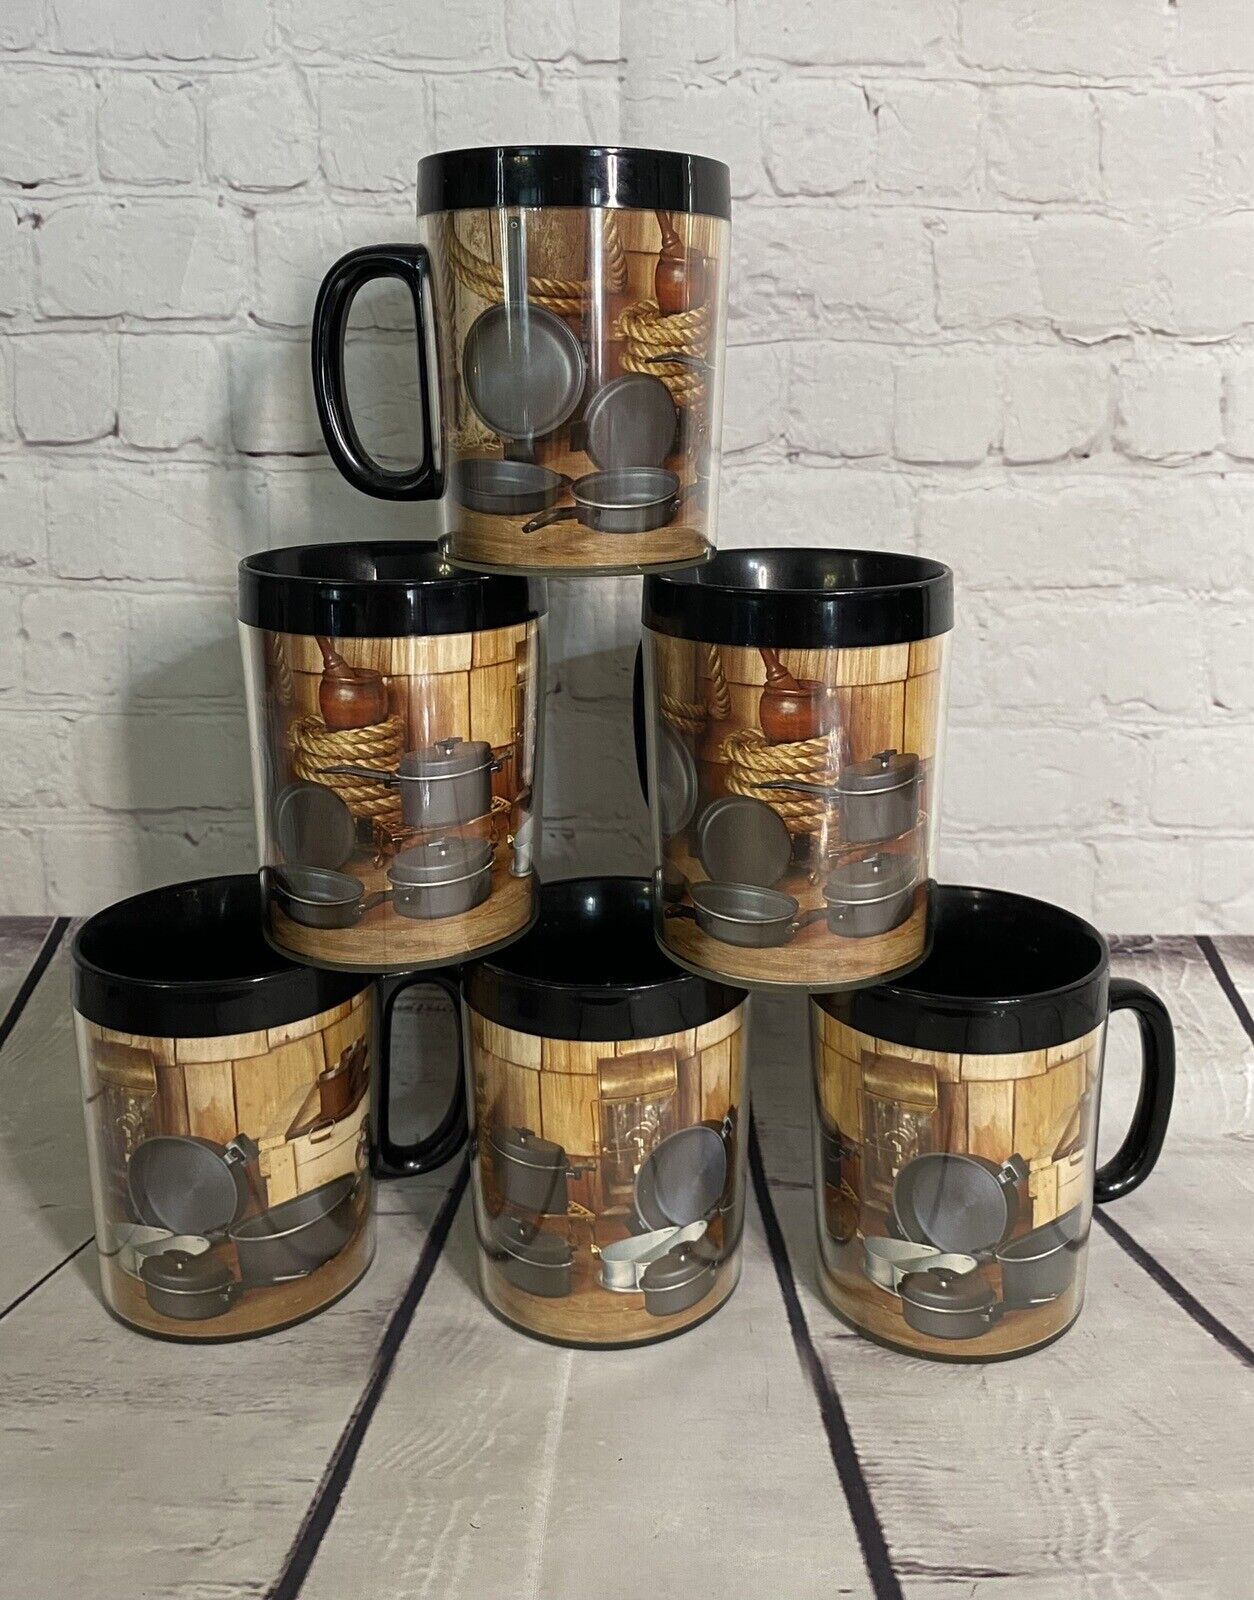 Vintage Thermo-Serv West Bend Insulated Coffee Cups Mugs Made in the USA (6)